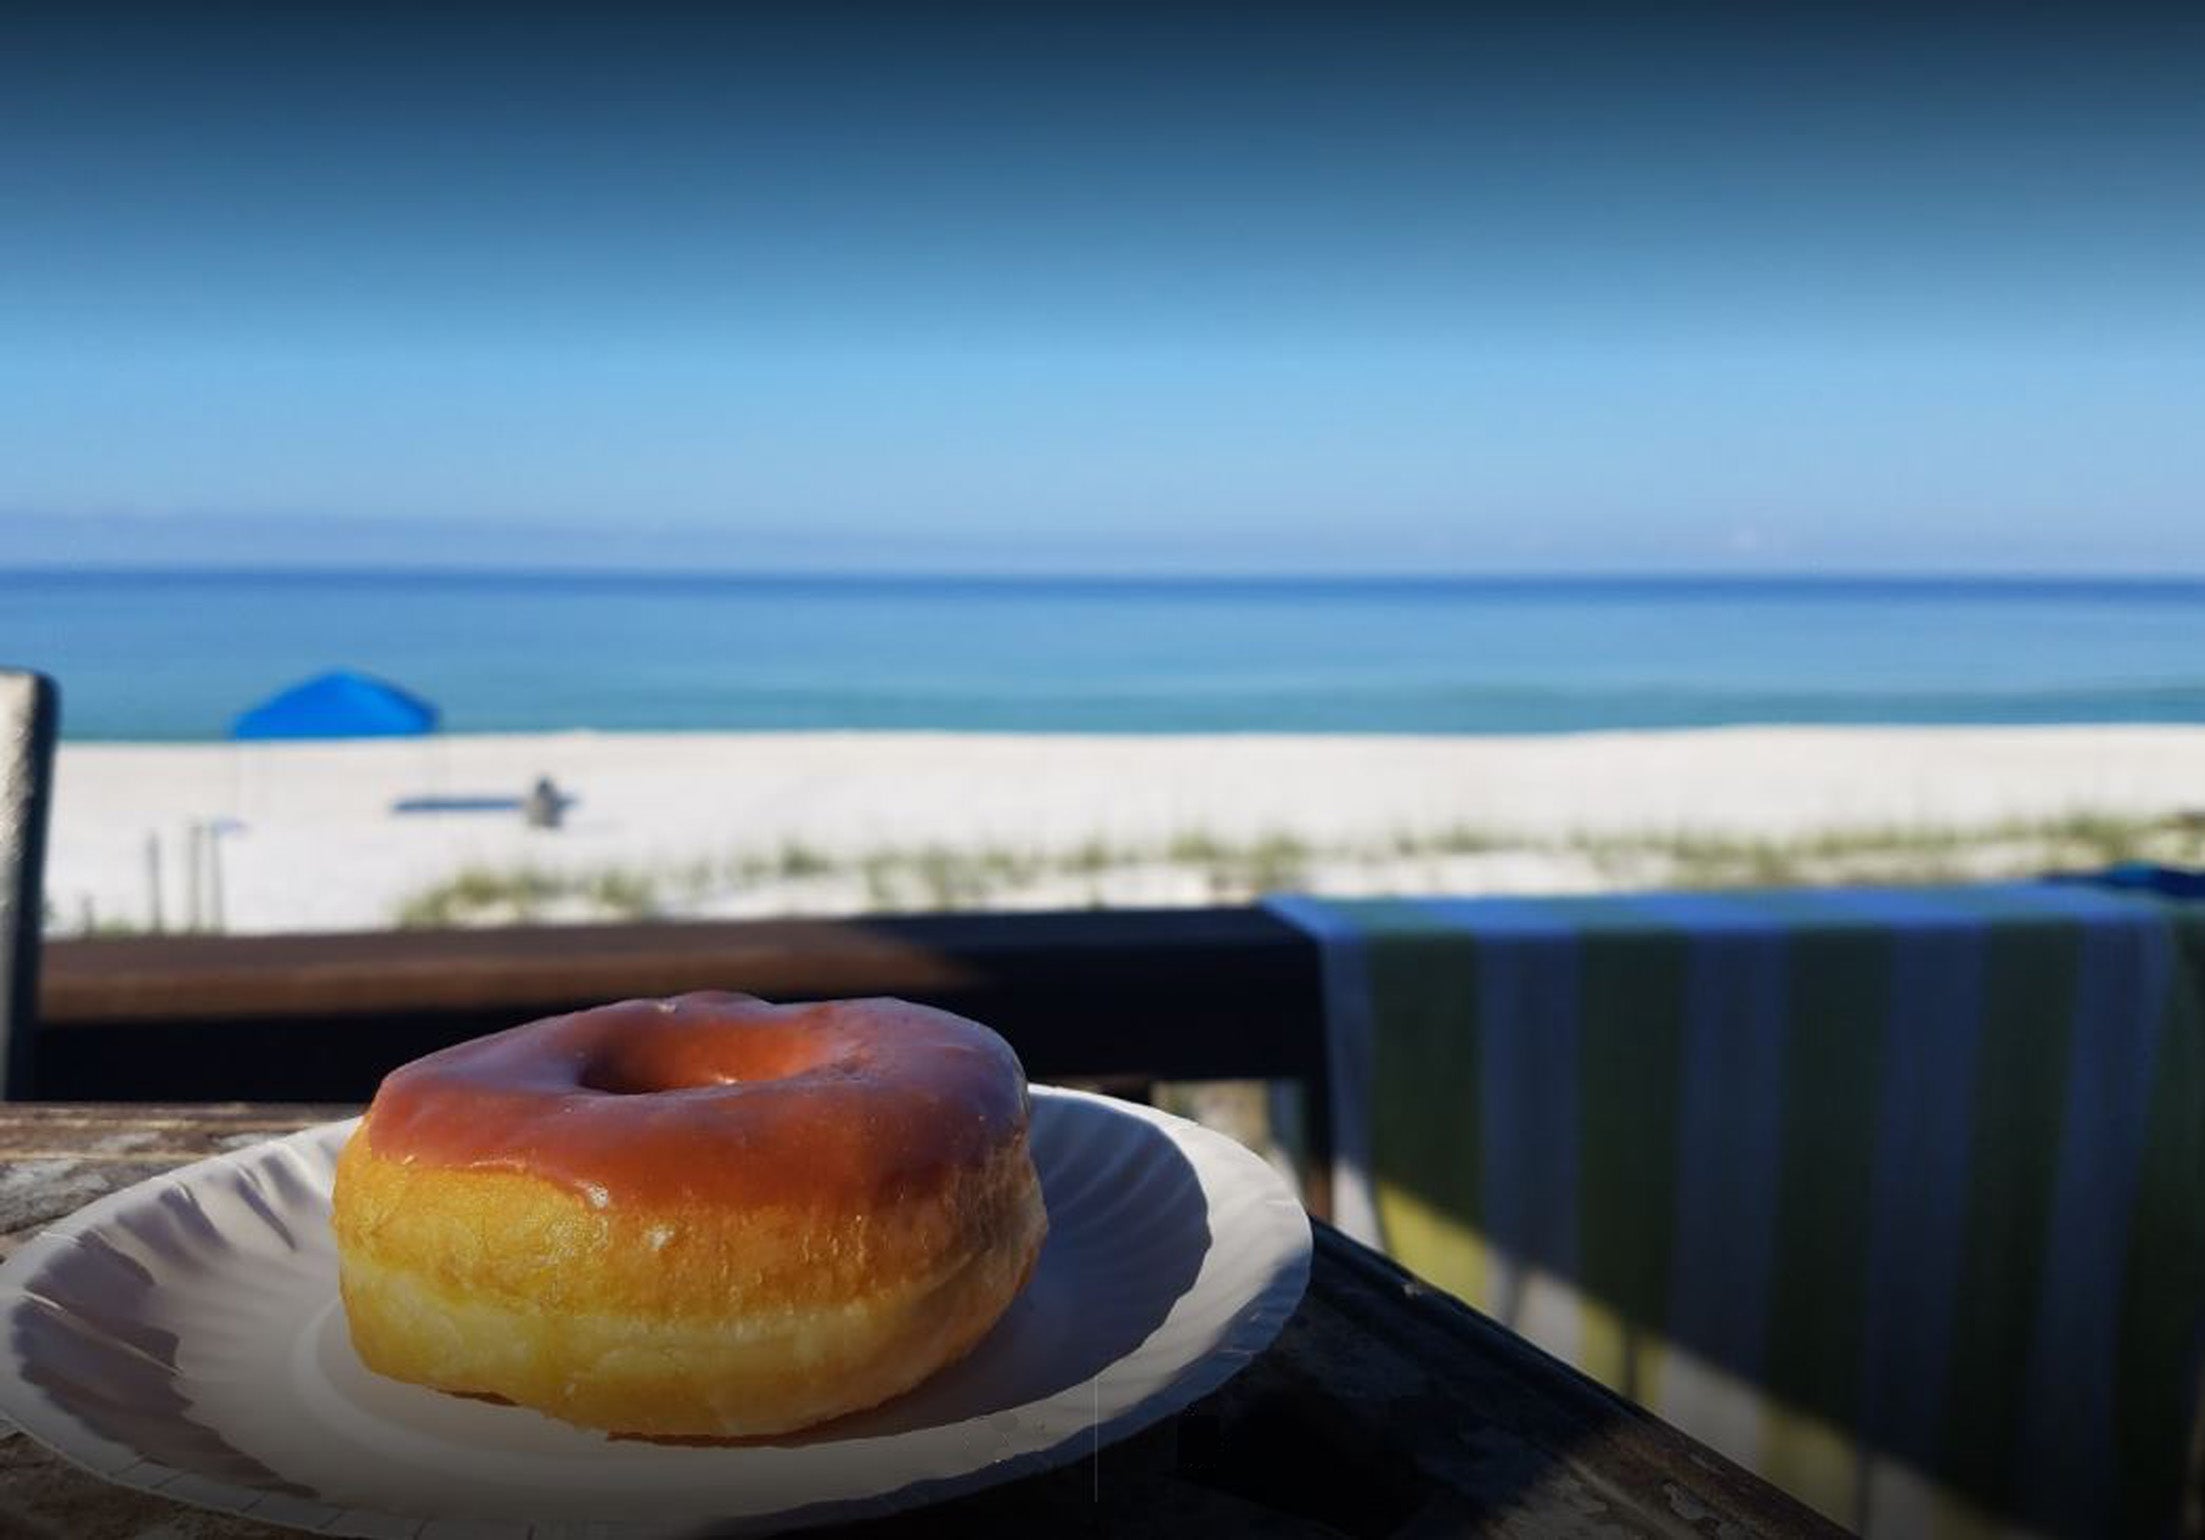 Wander 350 yards down the beach to Thomas Donuts